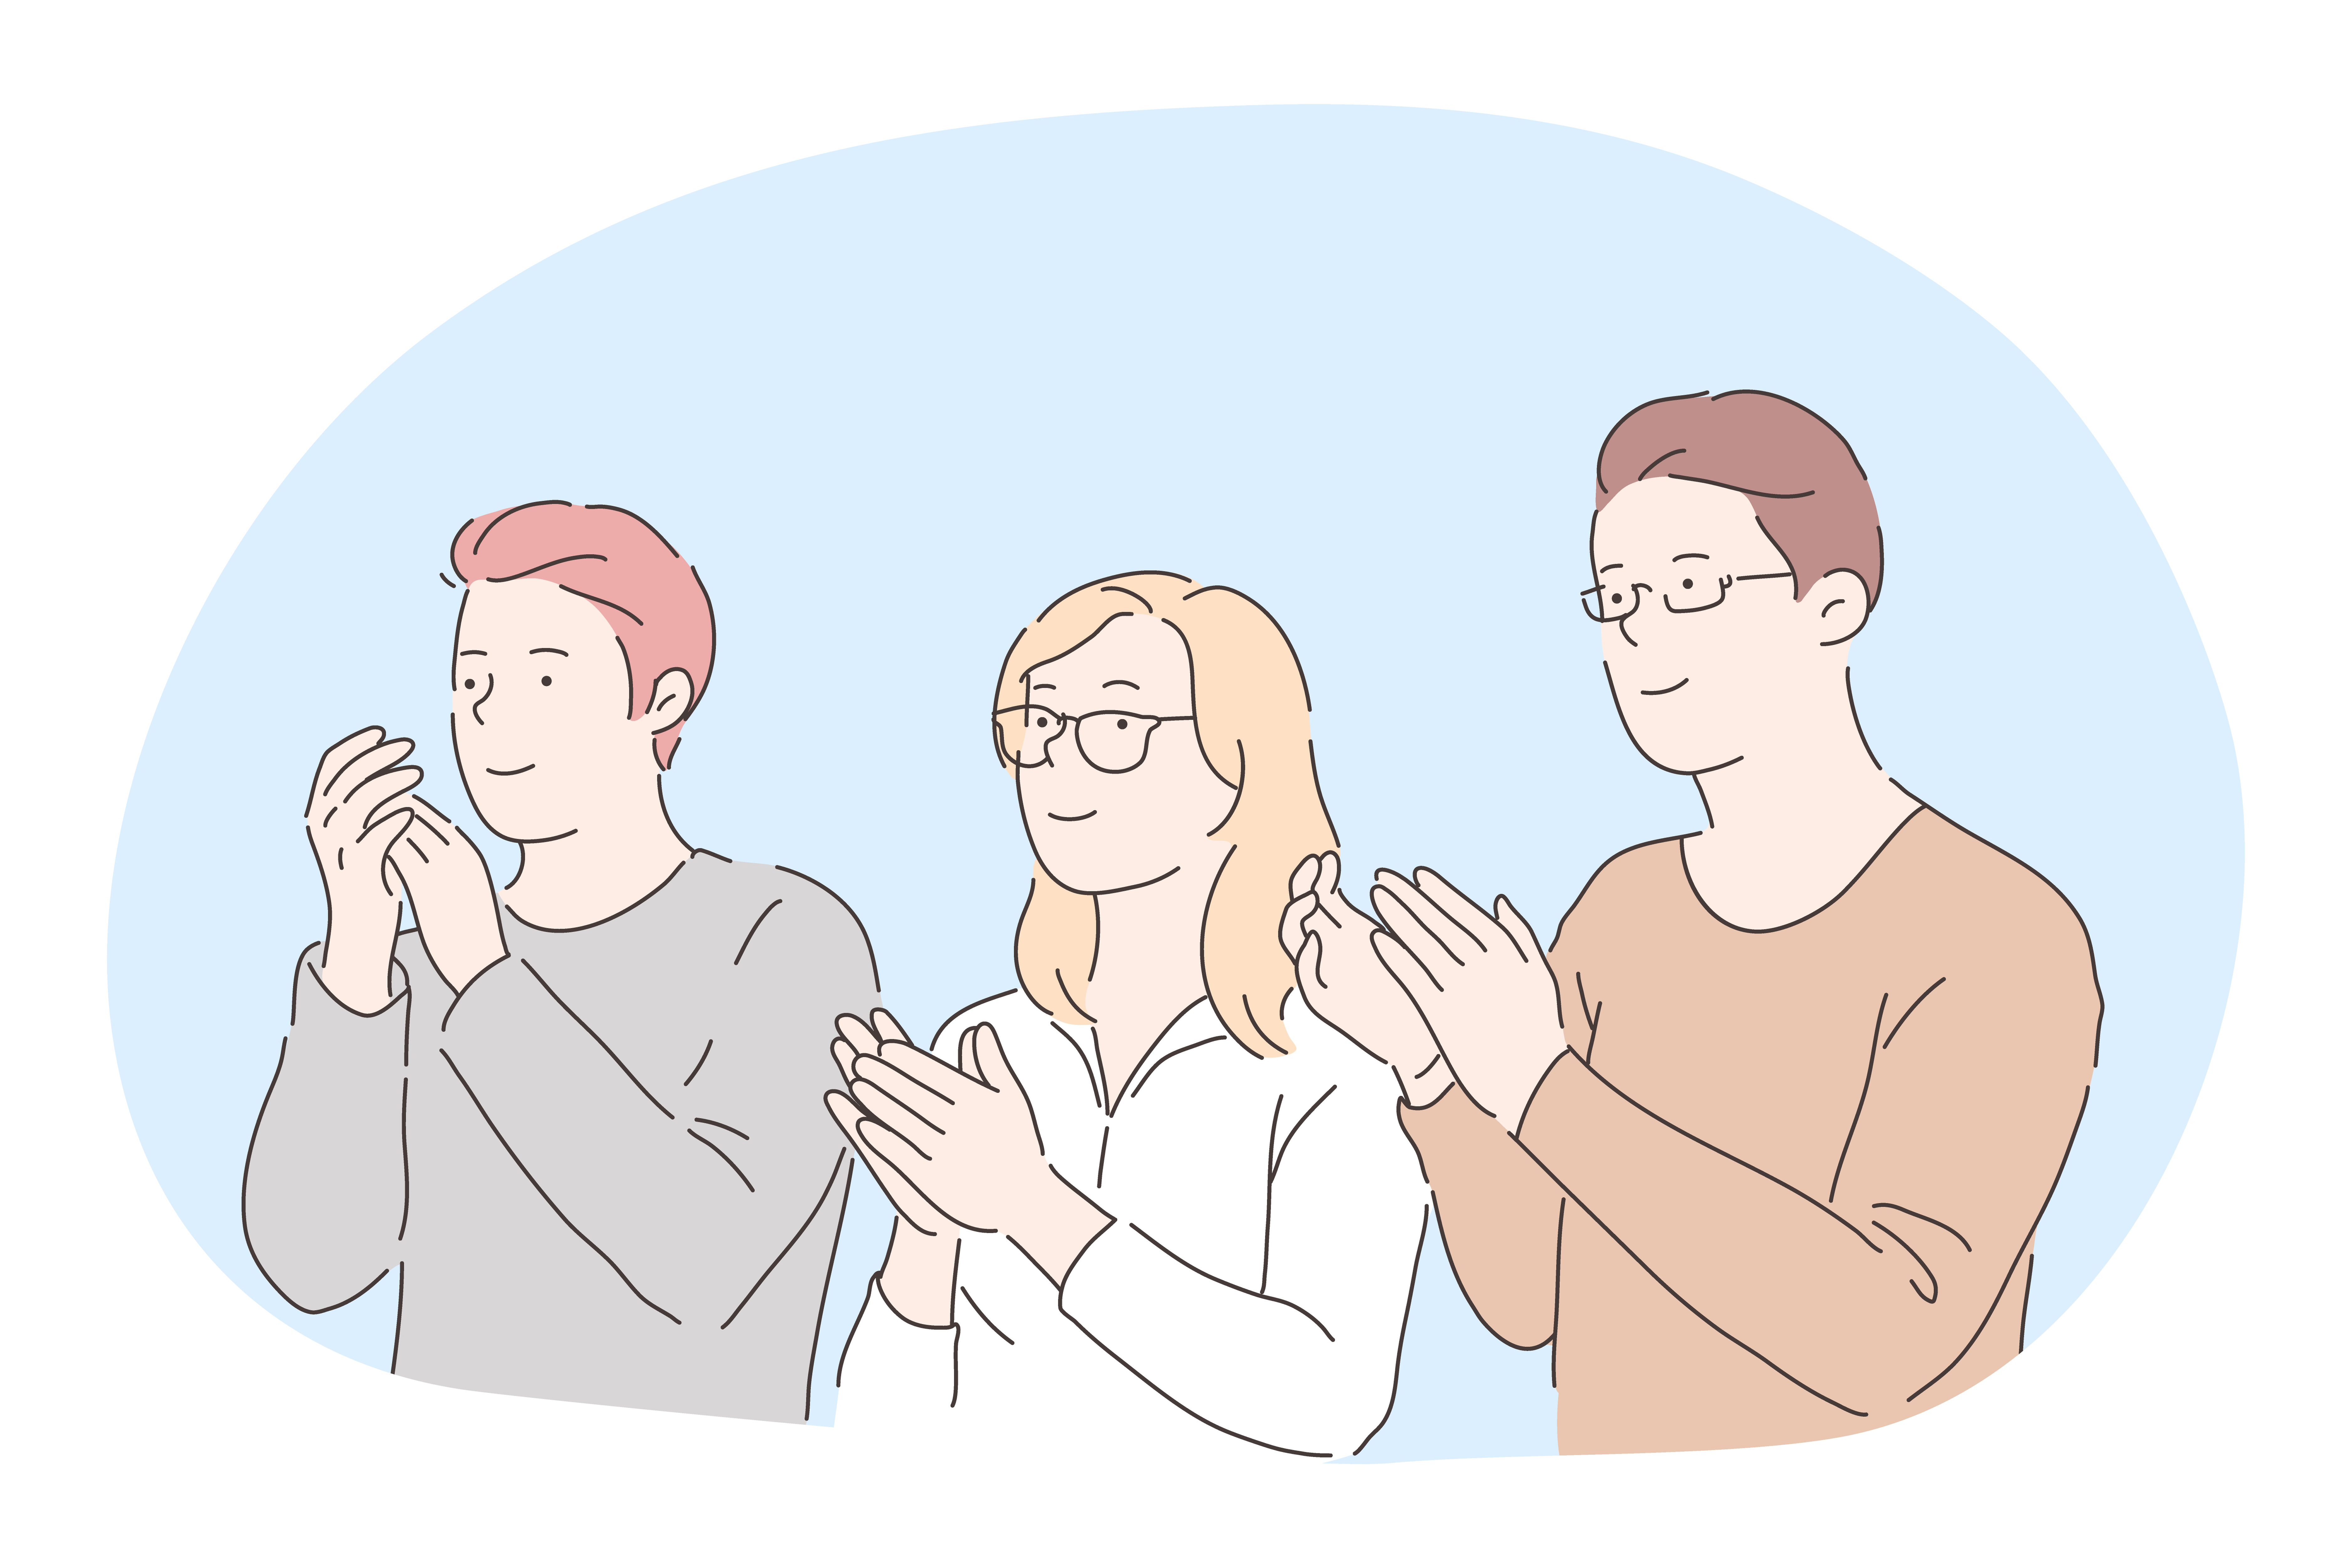 Applauding, support, congratulation concept. Three young positive people cartoon characters standing, looking aside and applauding with hands to partner or colleague. Applause, clapping, approval. Applauding, support, congratulation concept